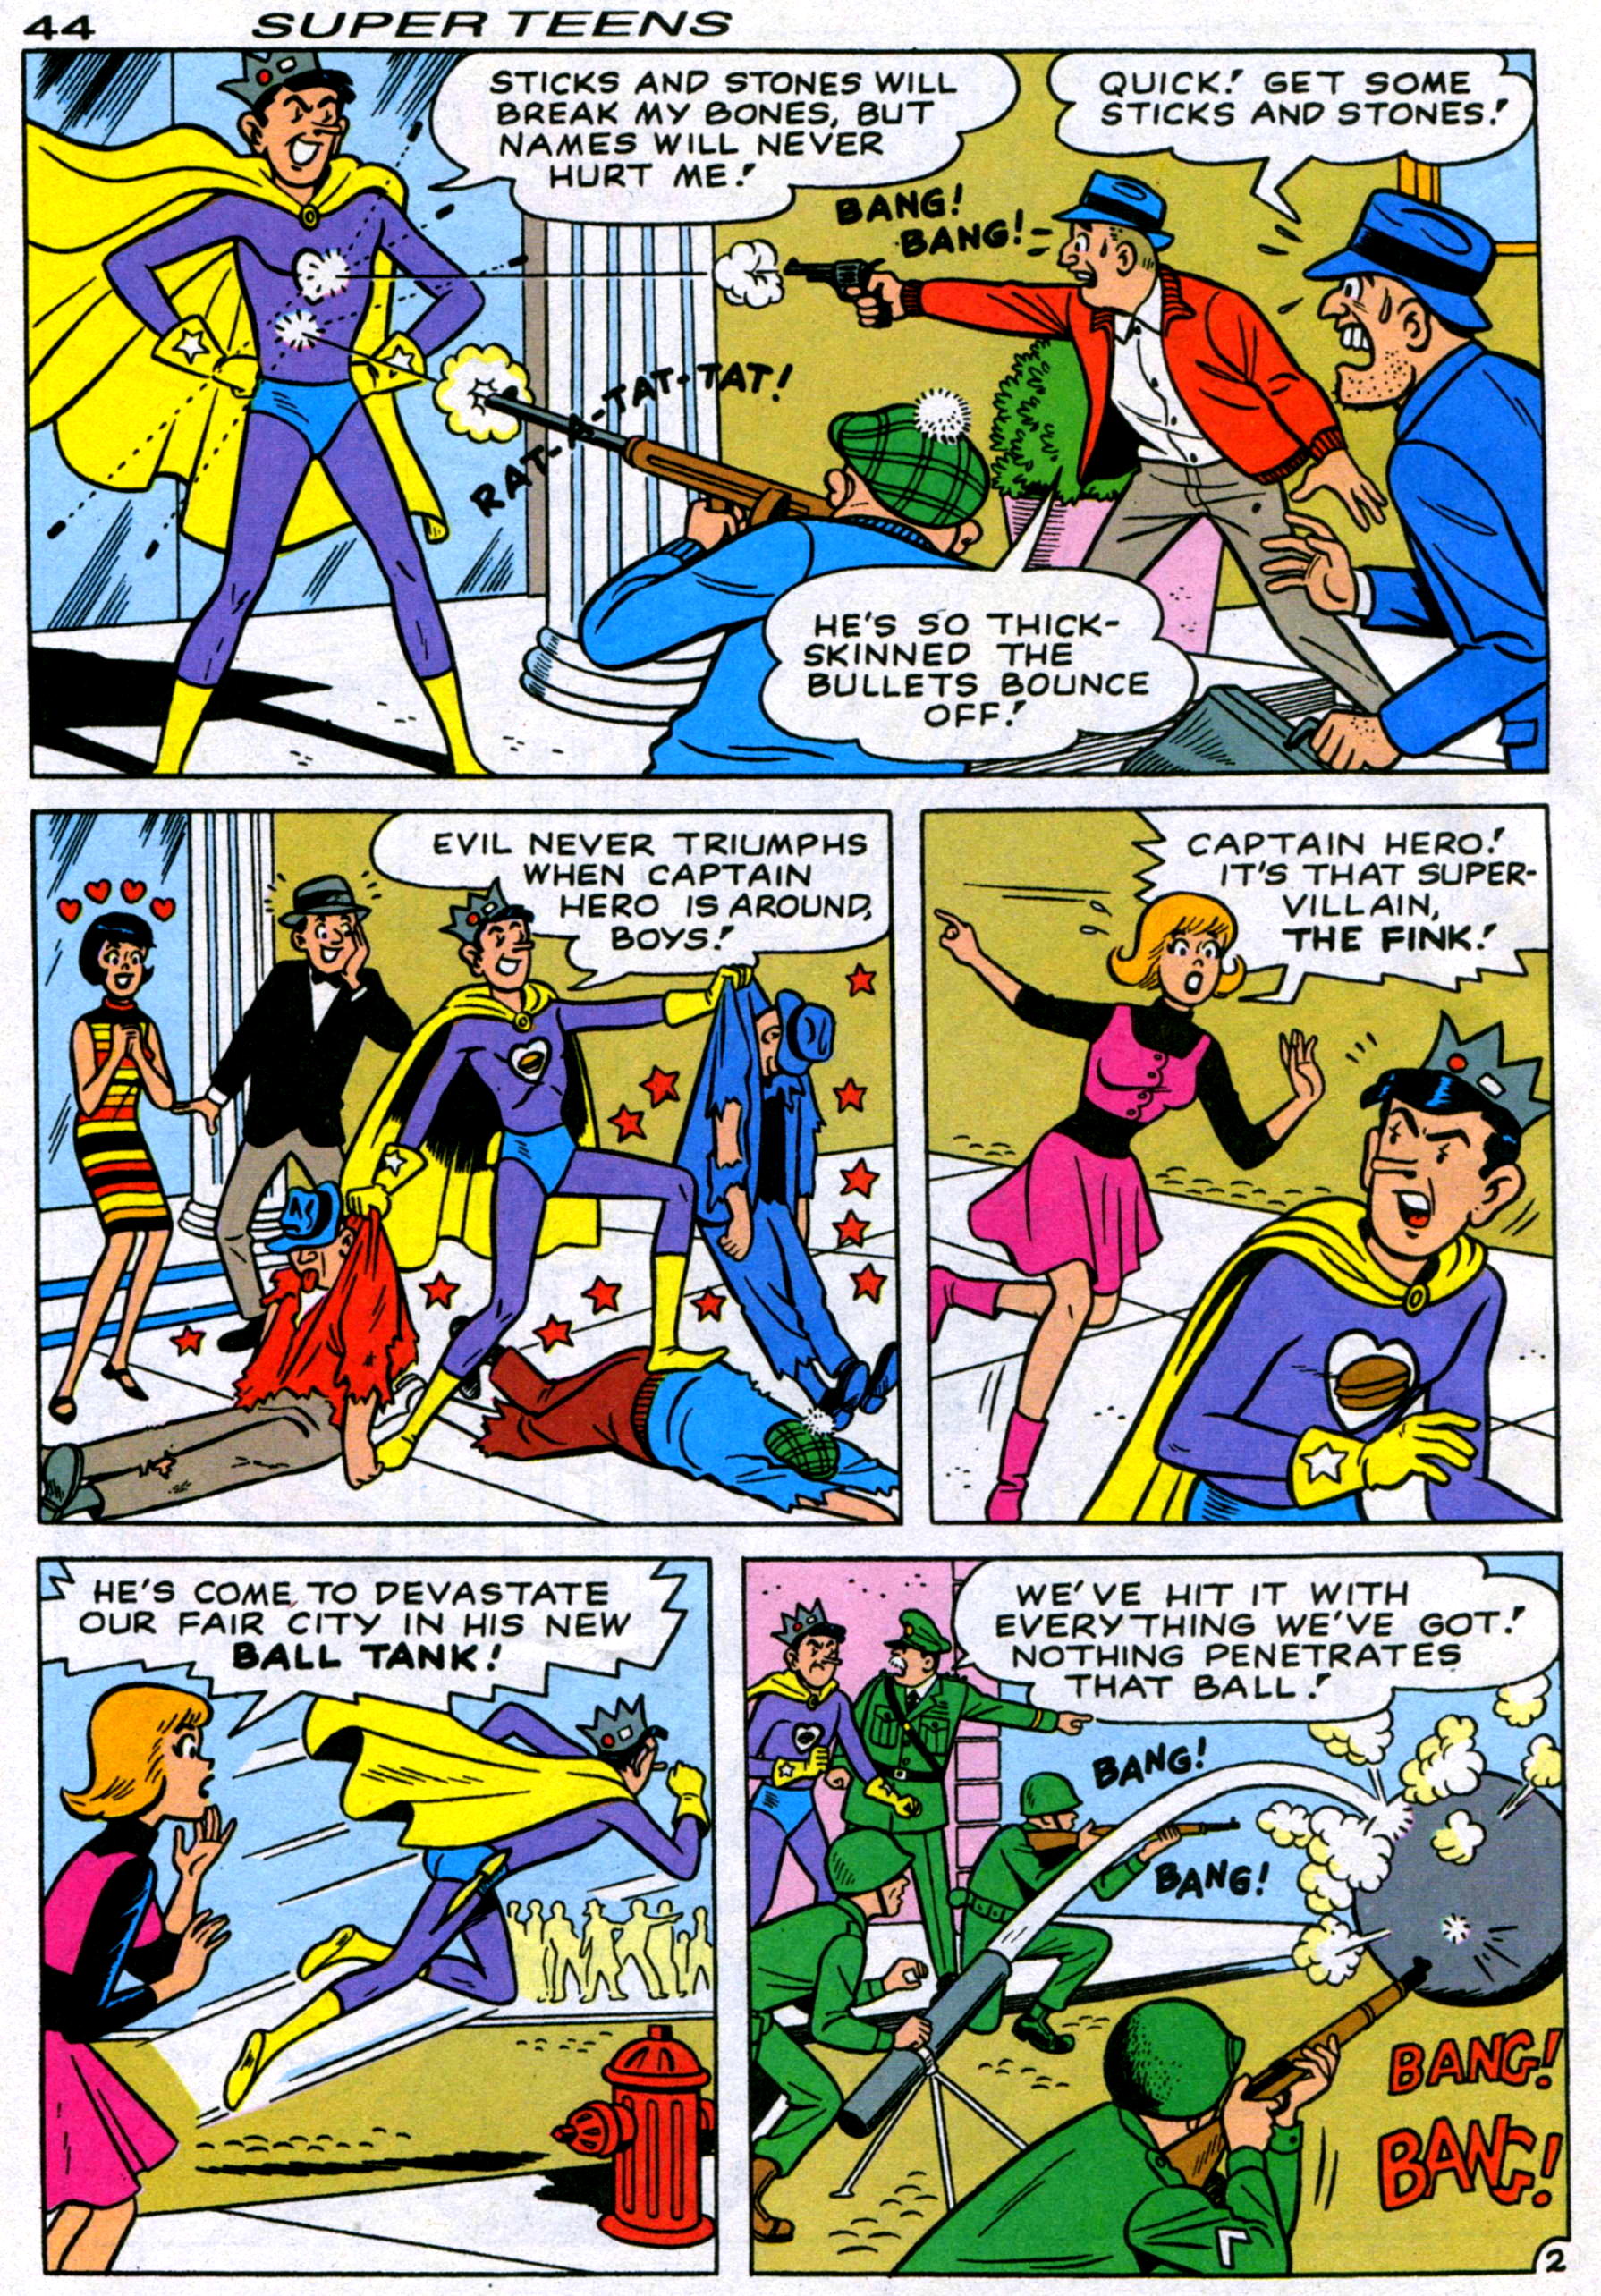 Read online Archie's Super Teens comic -  Issue #1 - 46